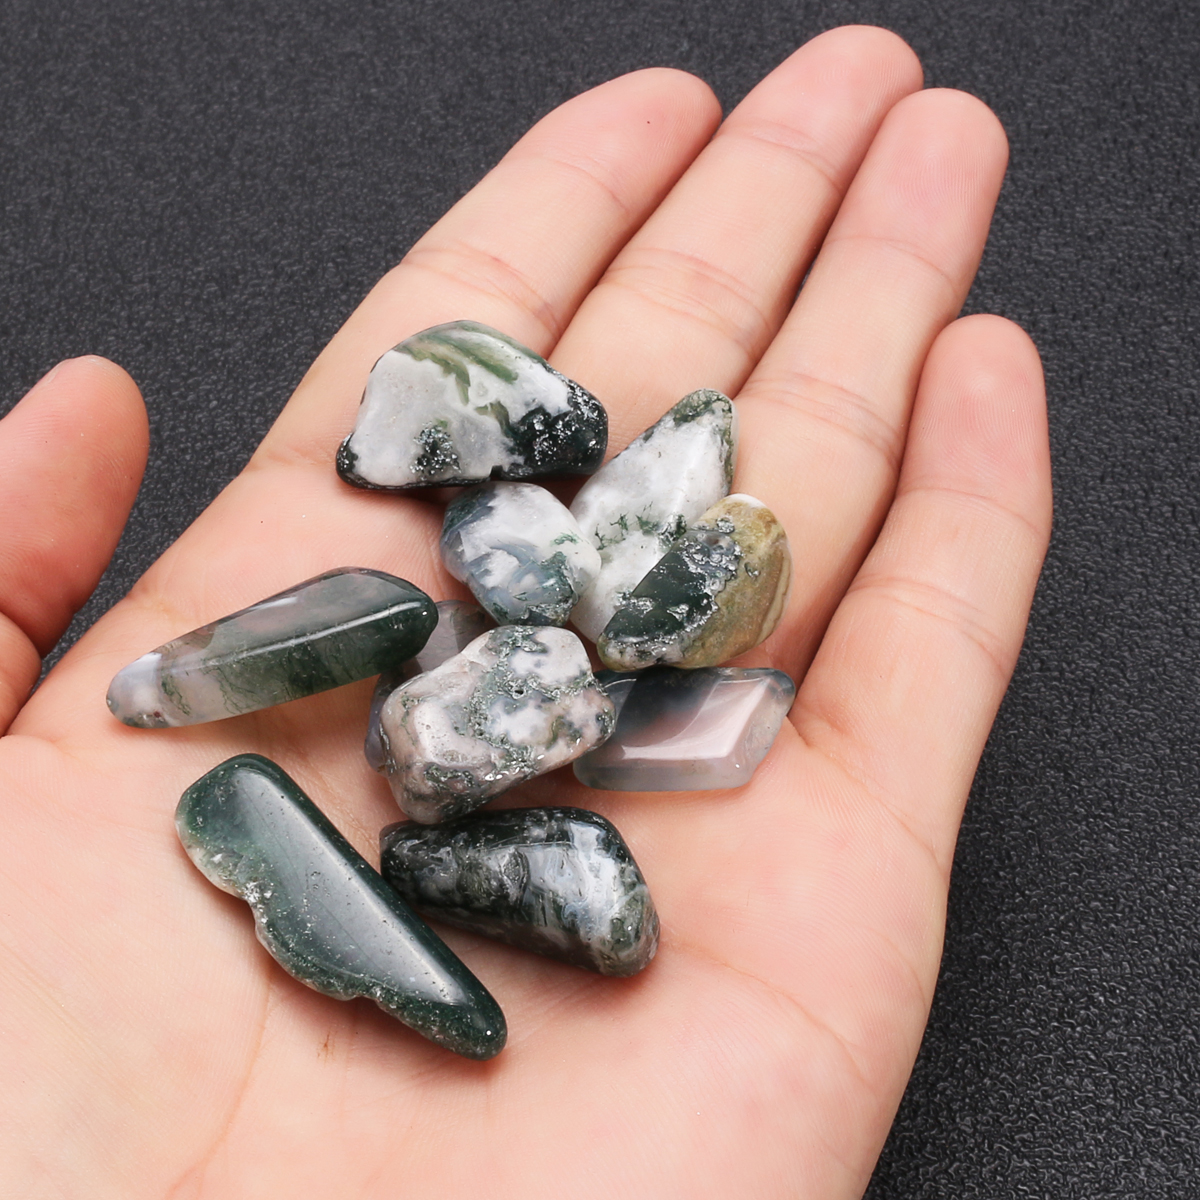 10-Pcs-of-Natural-Stone-Moss-Agate-Crystal-DIY-Jewelry-1149440